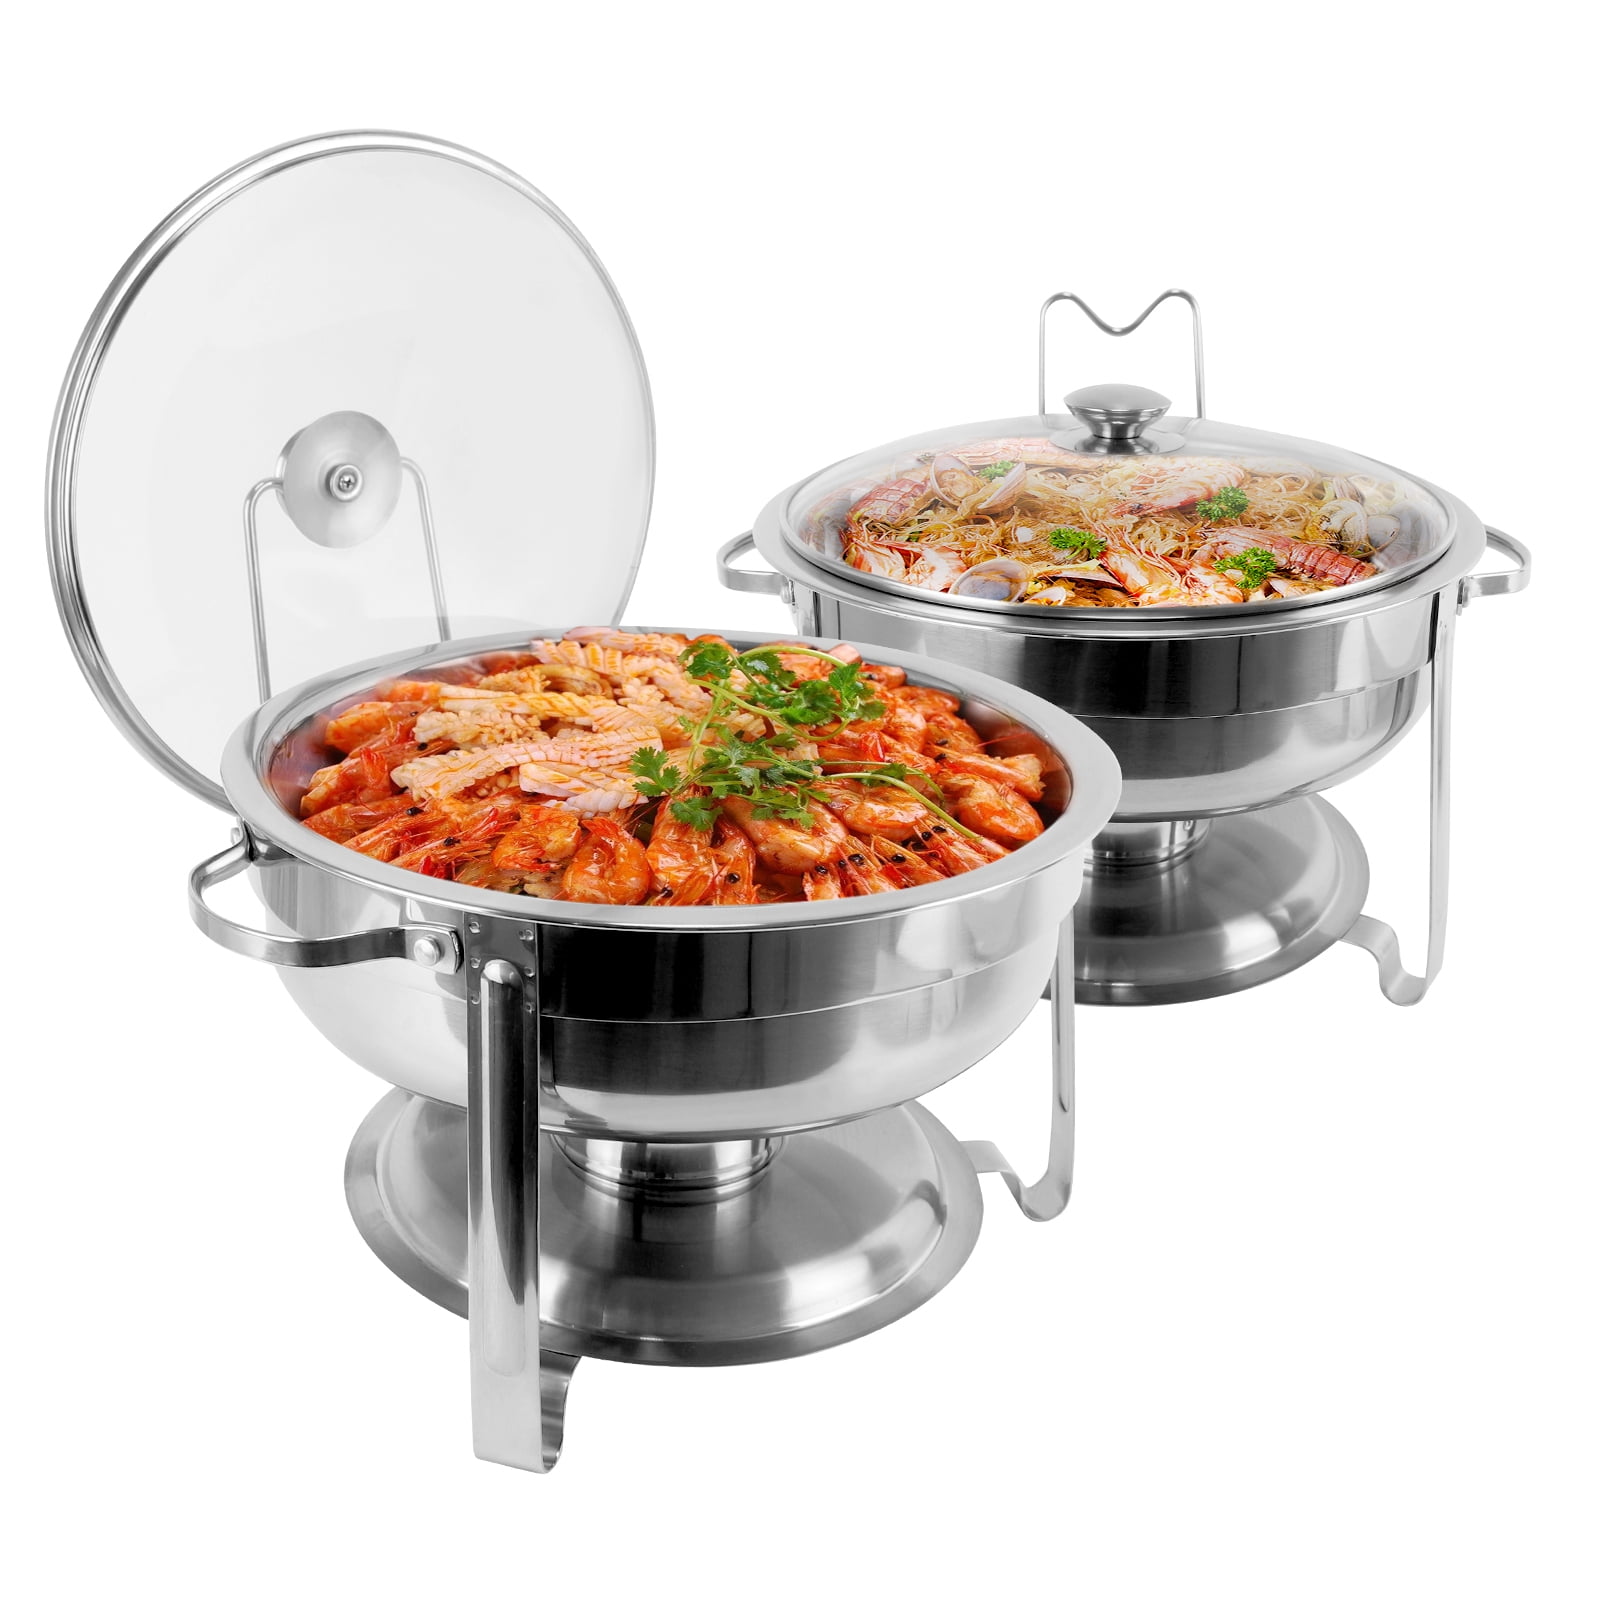 BreeRainz 2 Packs 4 QT Round Chafing Dish Buffet Set, Stainless Steel ...